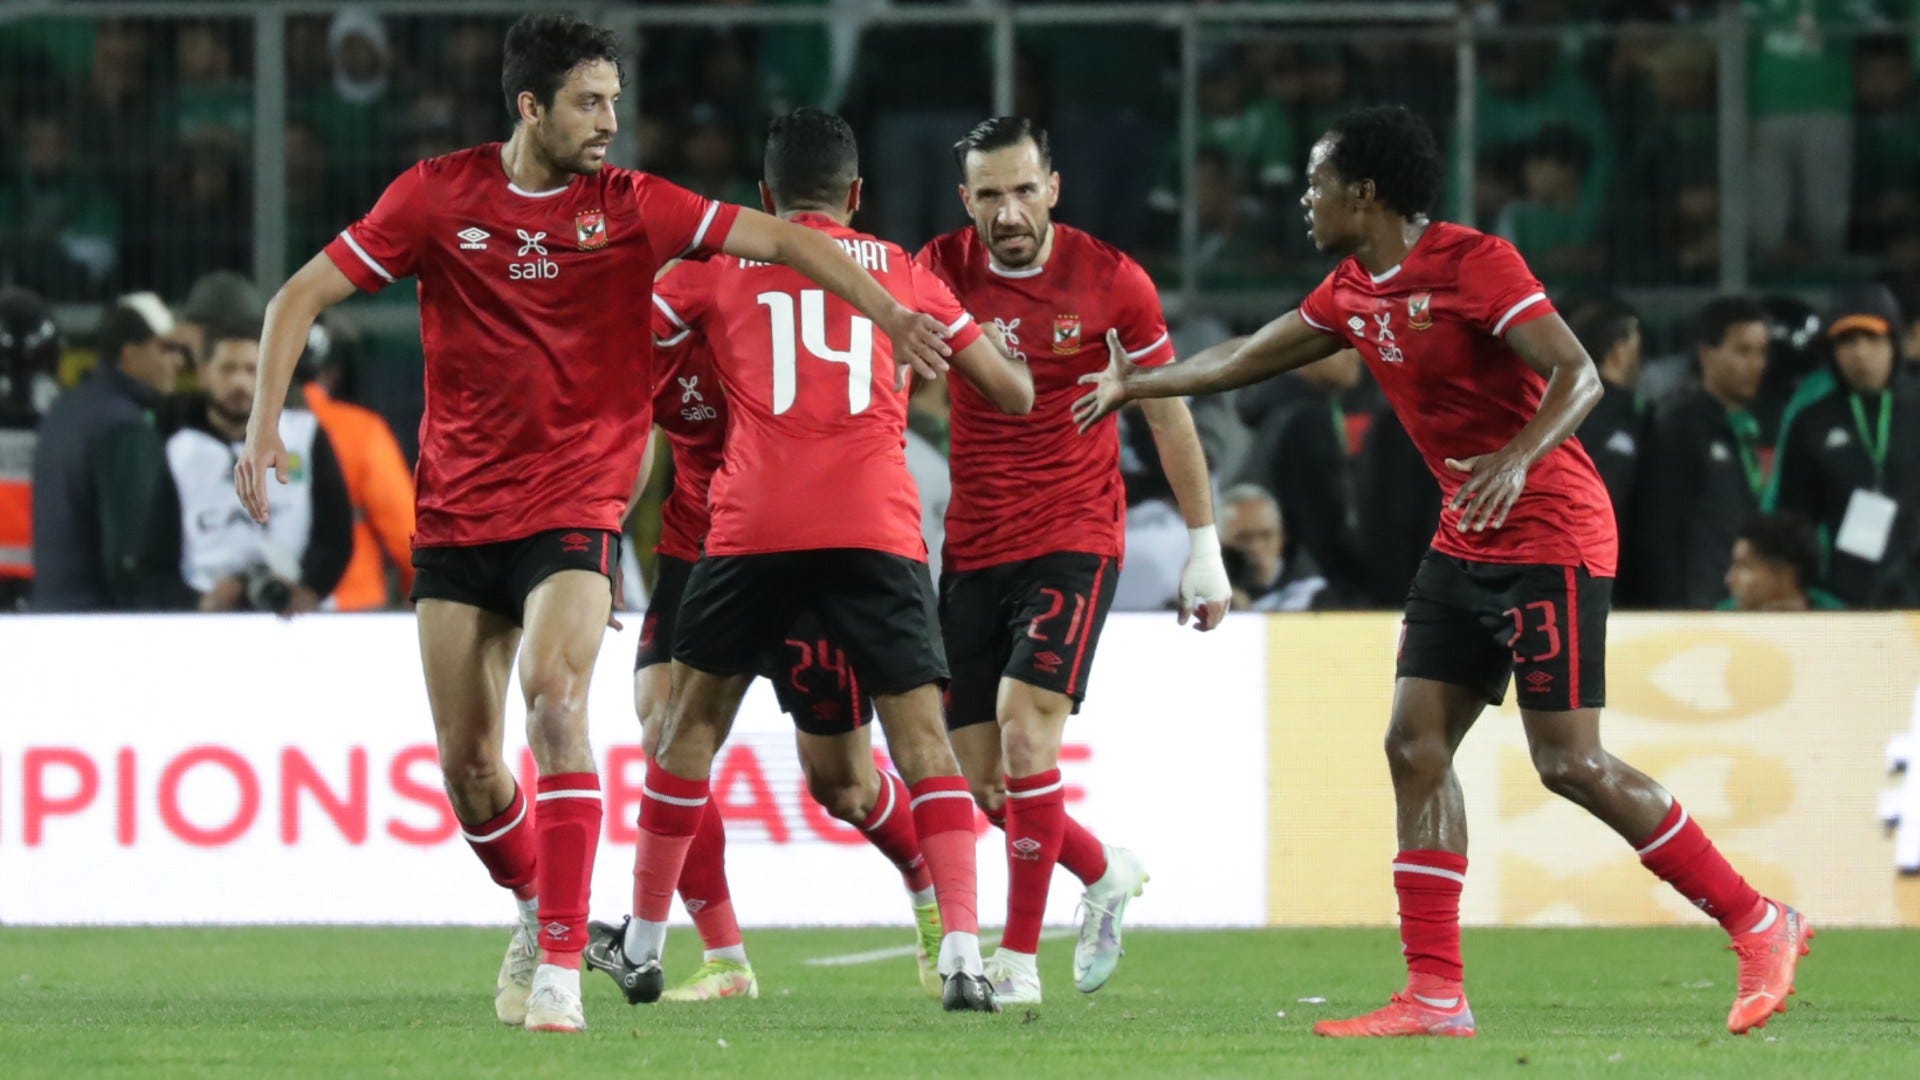 Al Ahly are victims in Caf Champions League and Afcon qualification